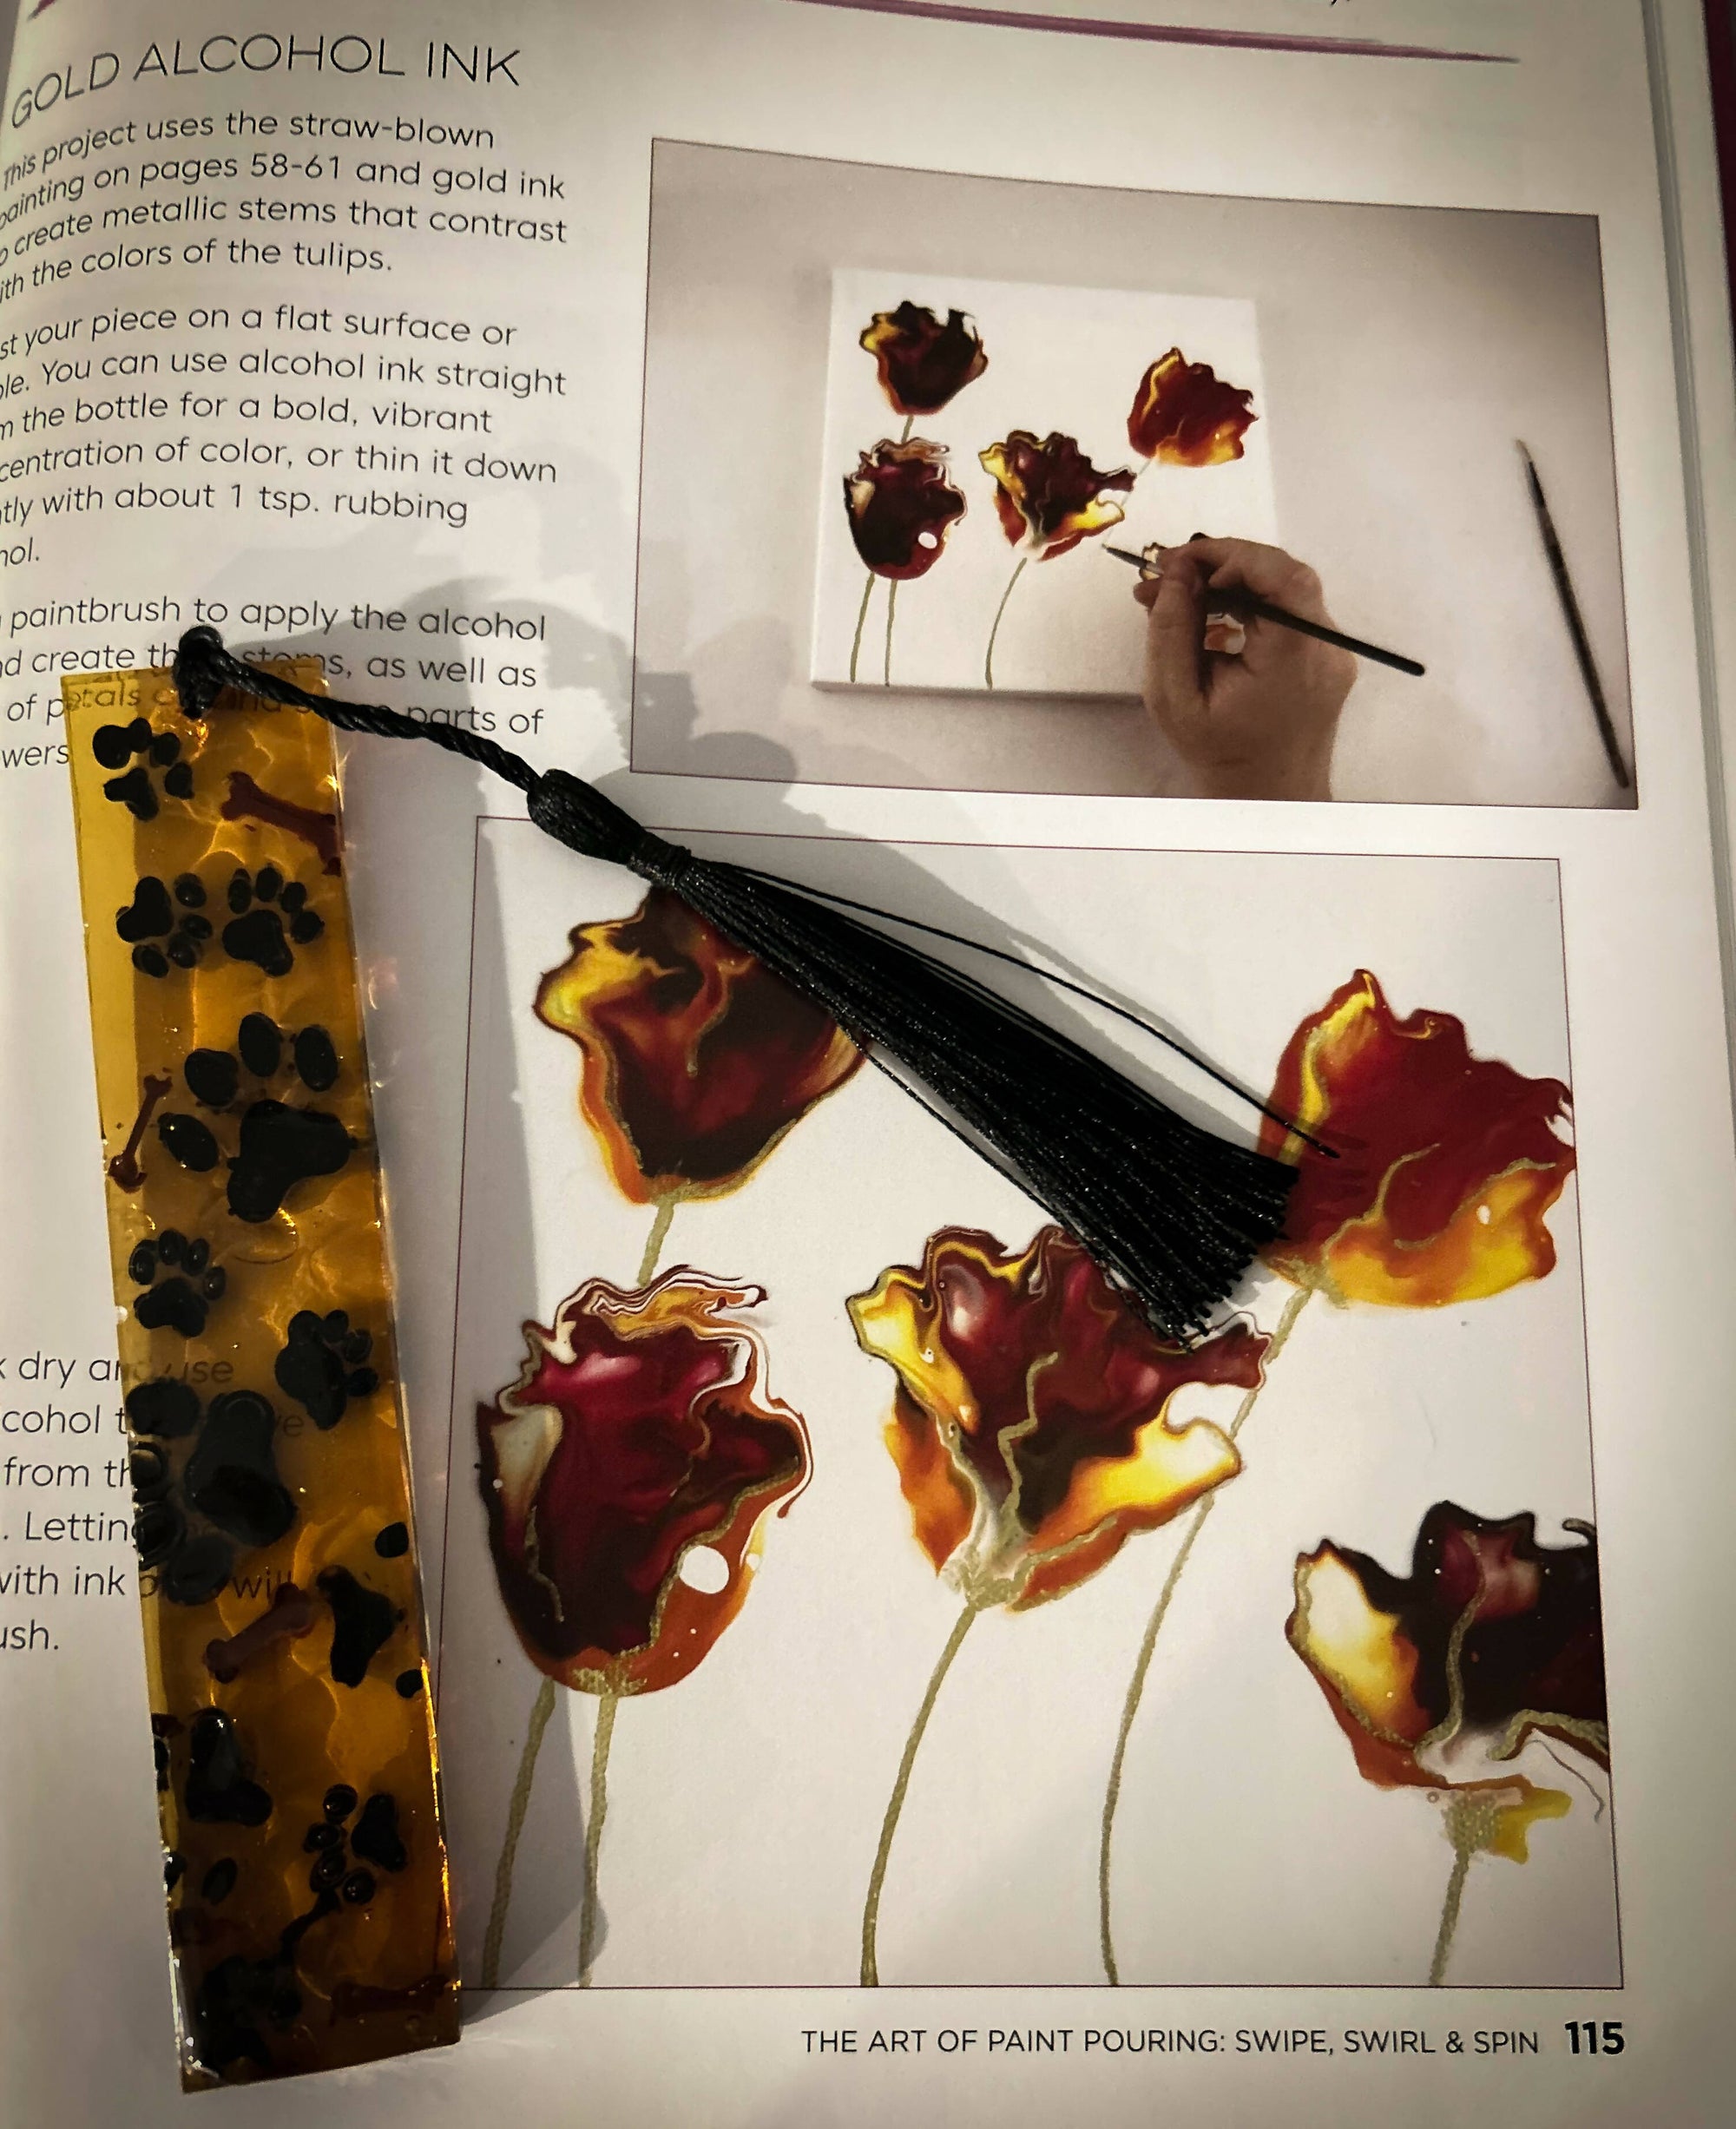 Bookmark with flower